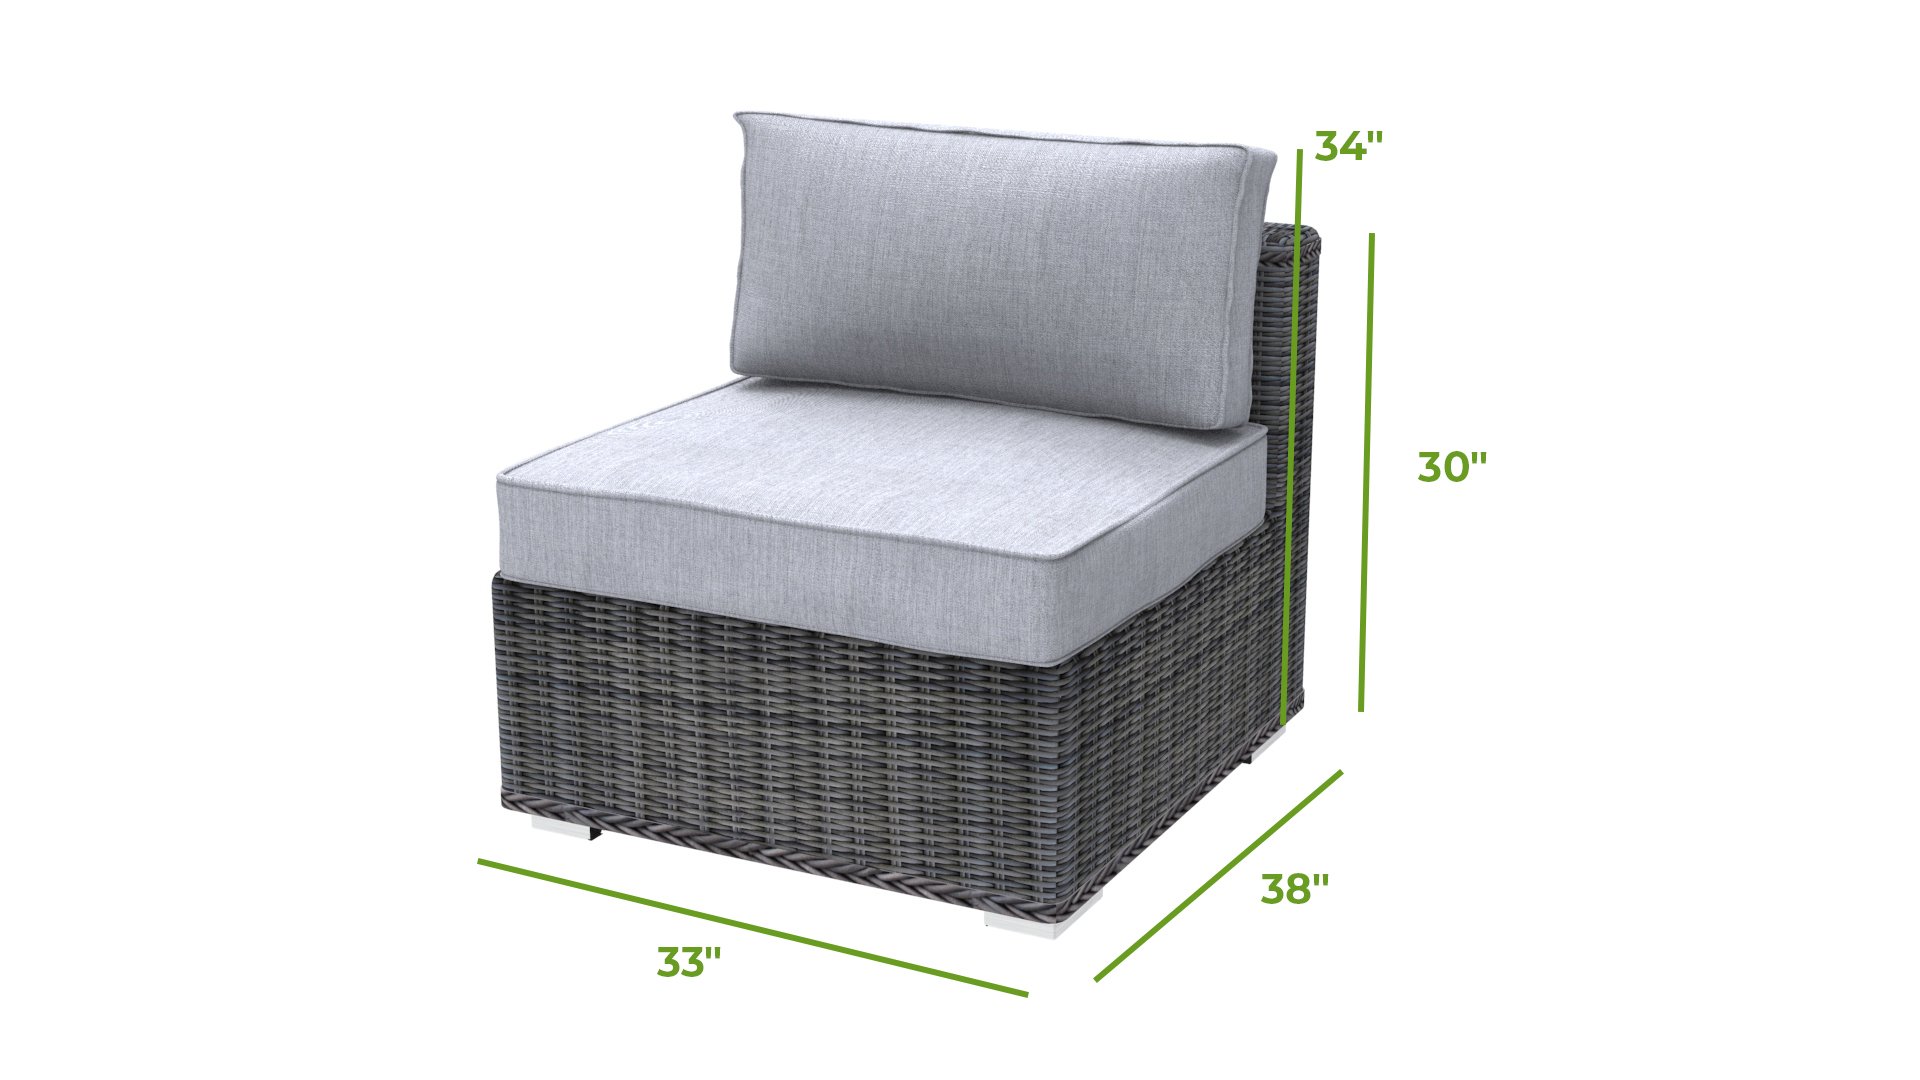 middle sofa dimensions